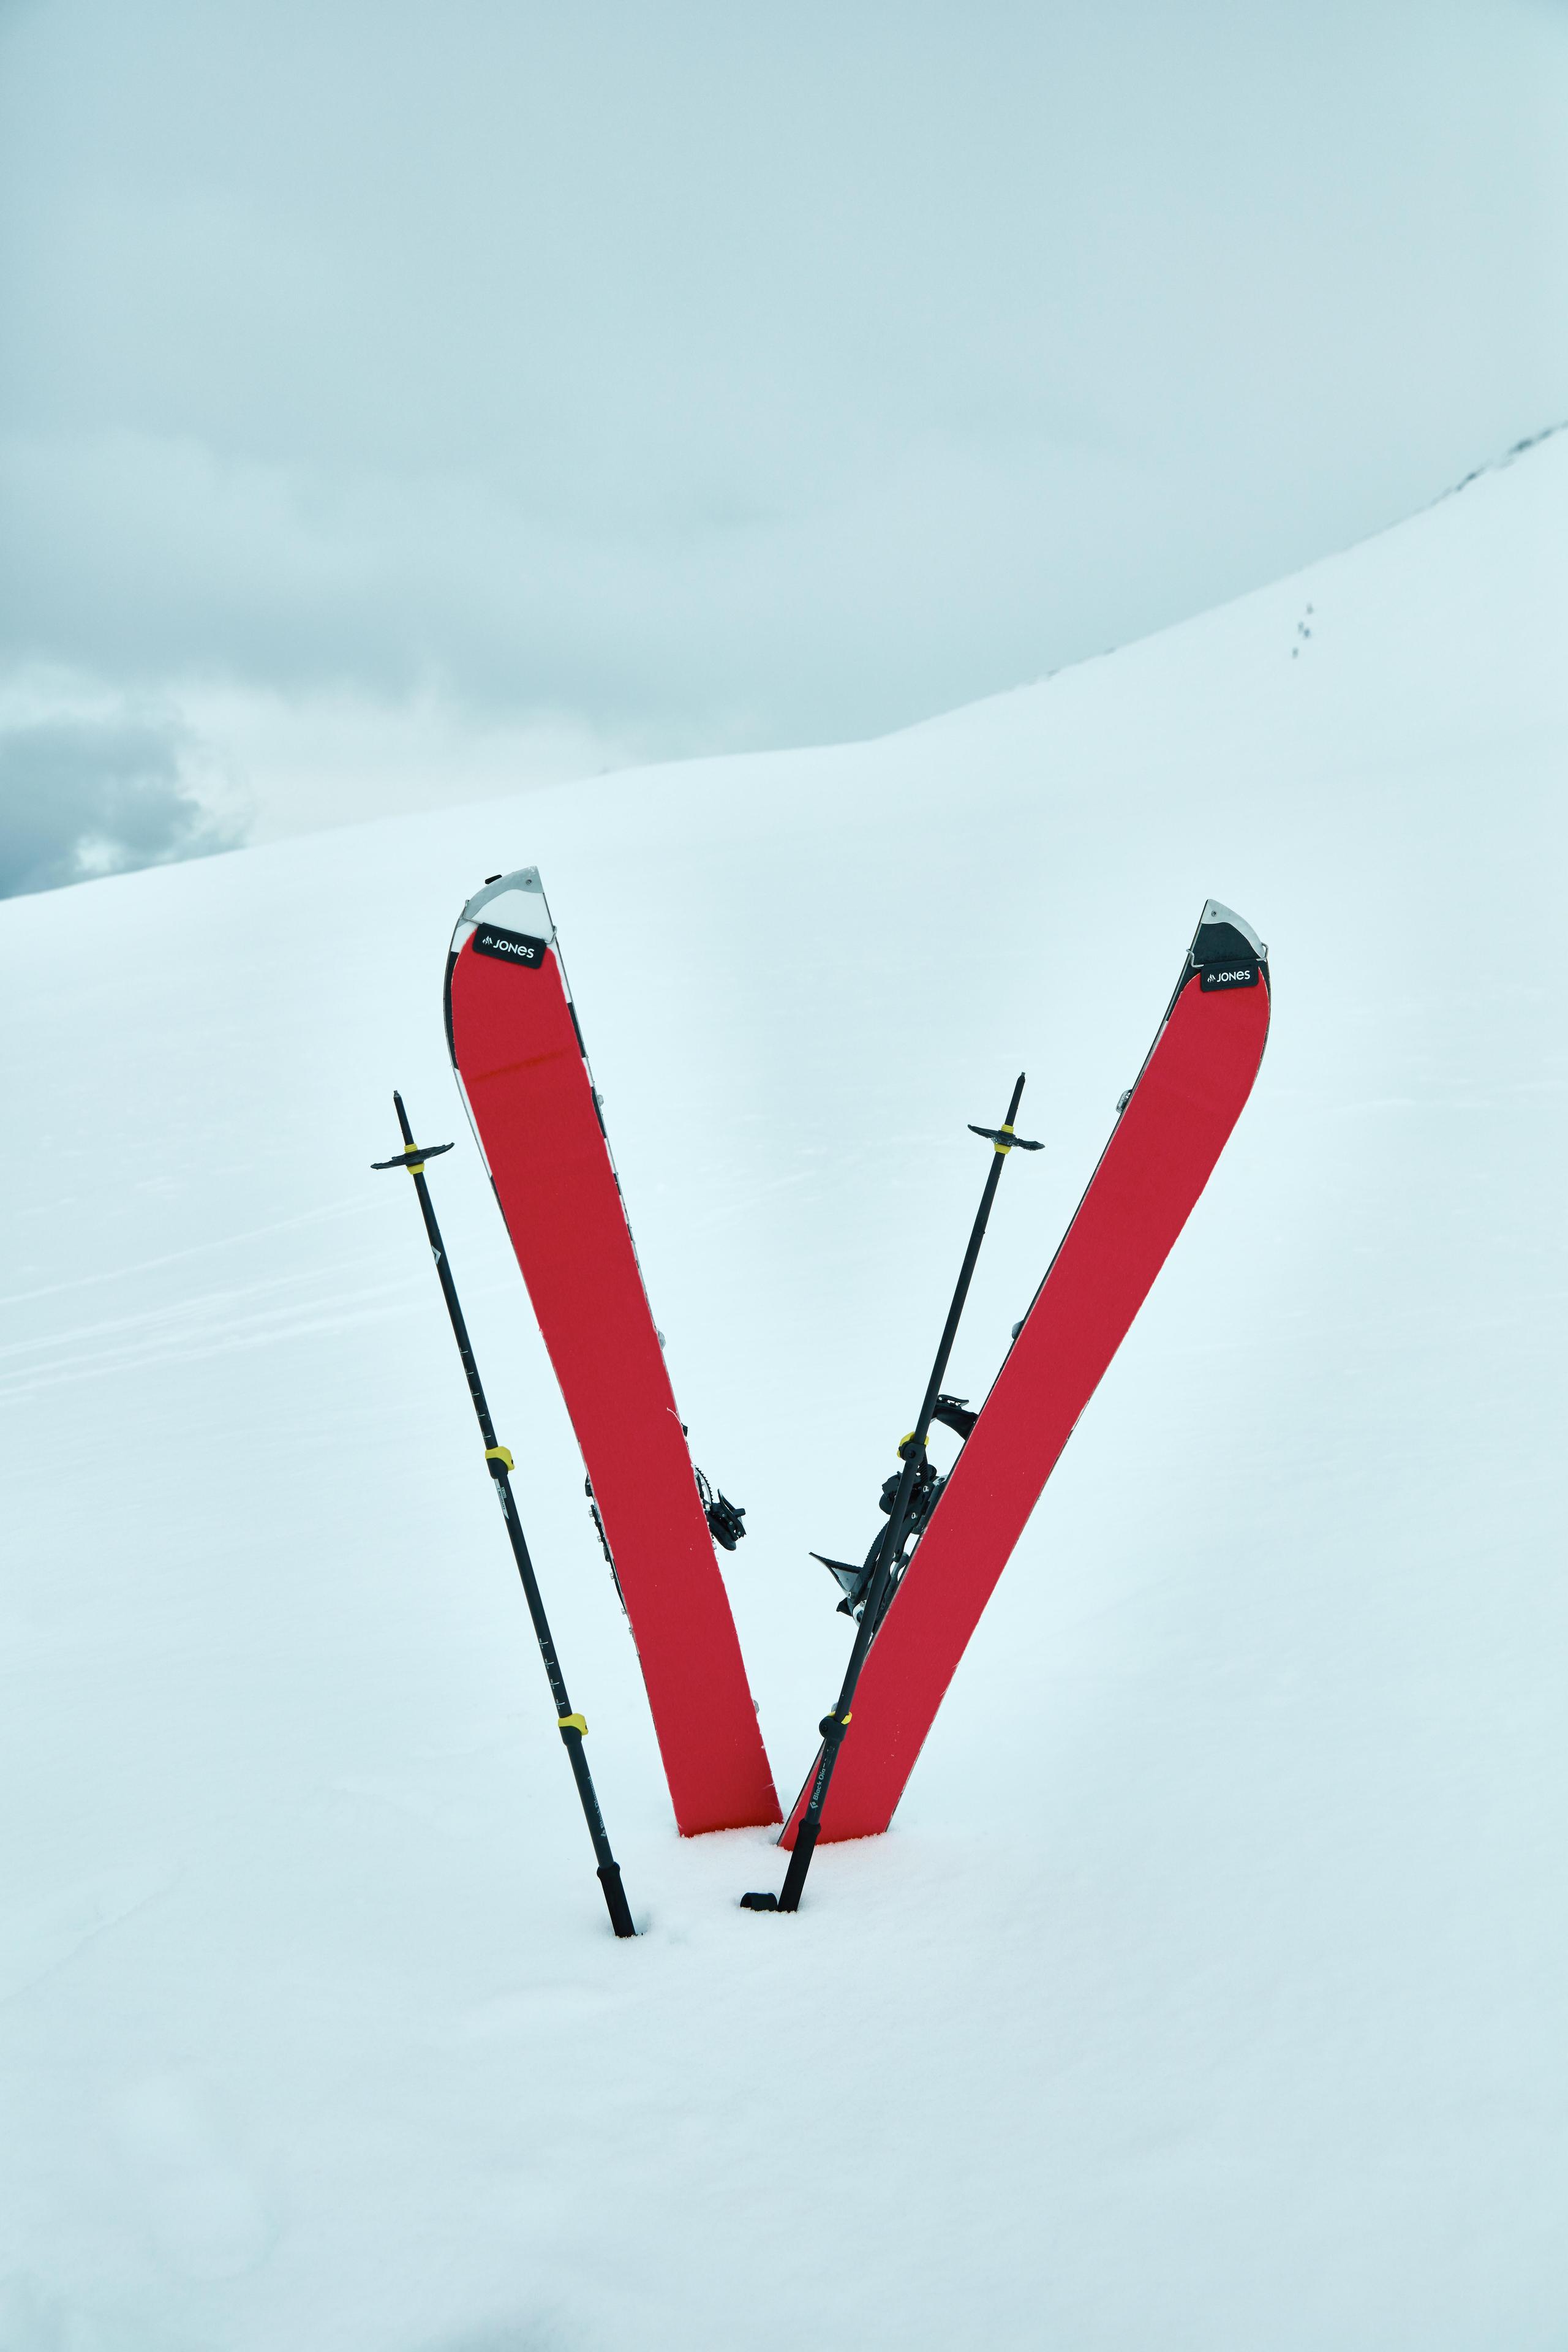 Red skis stuck in the snow in Iceland